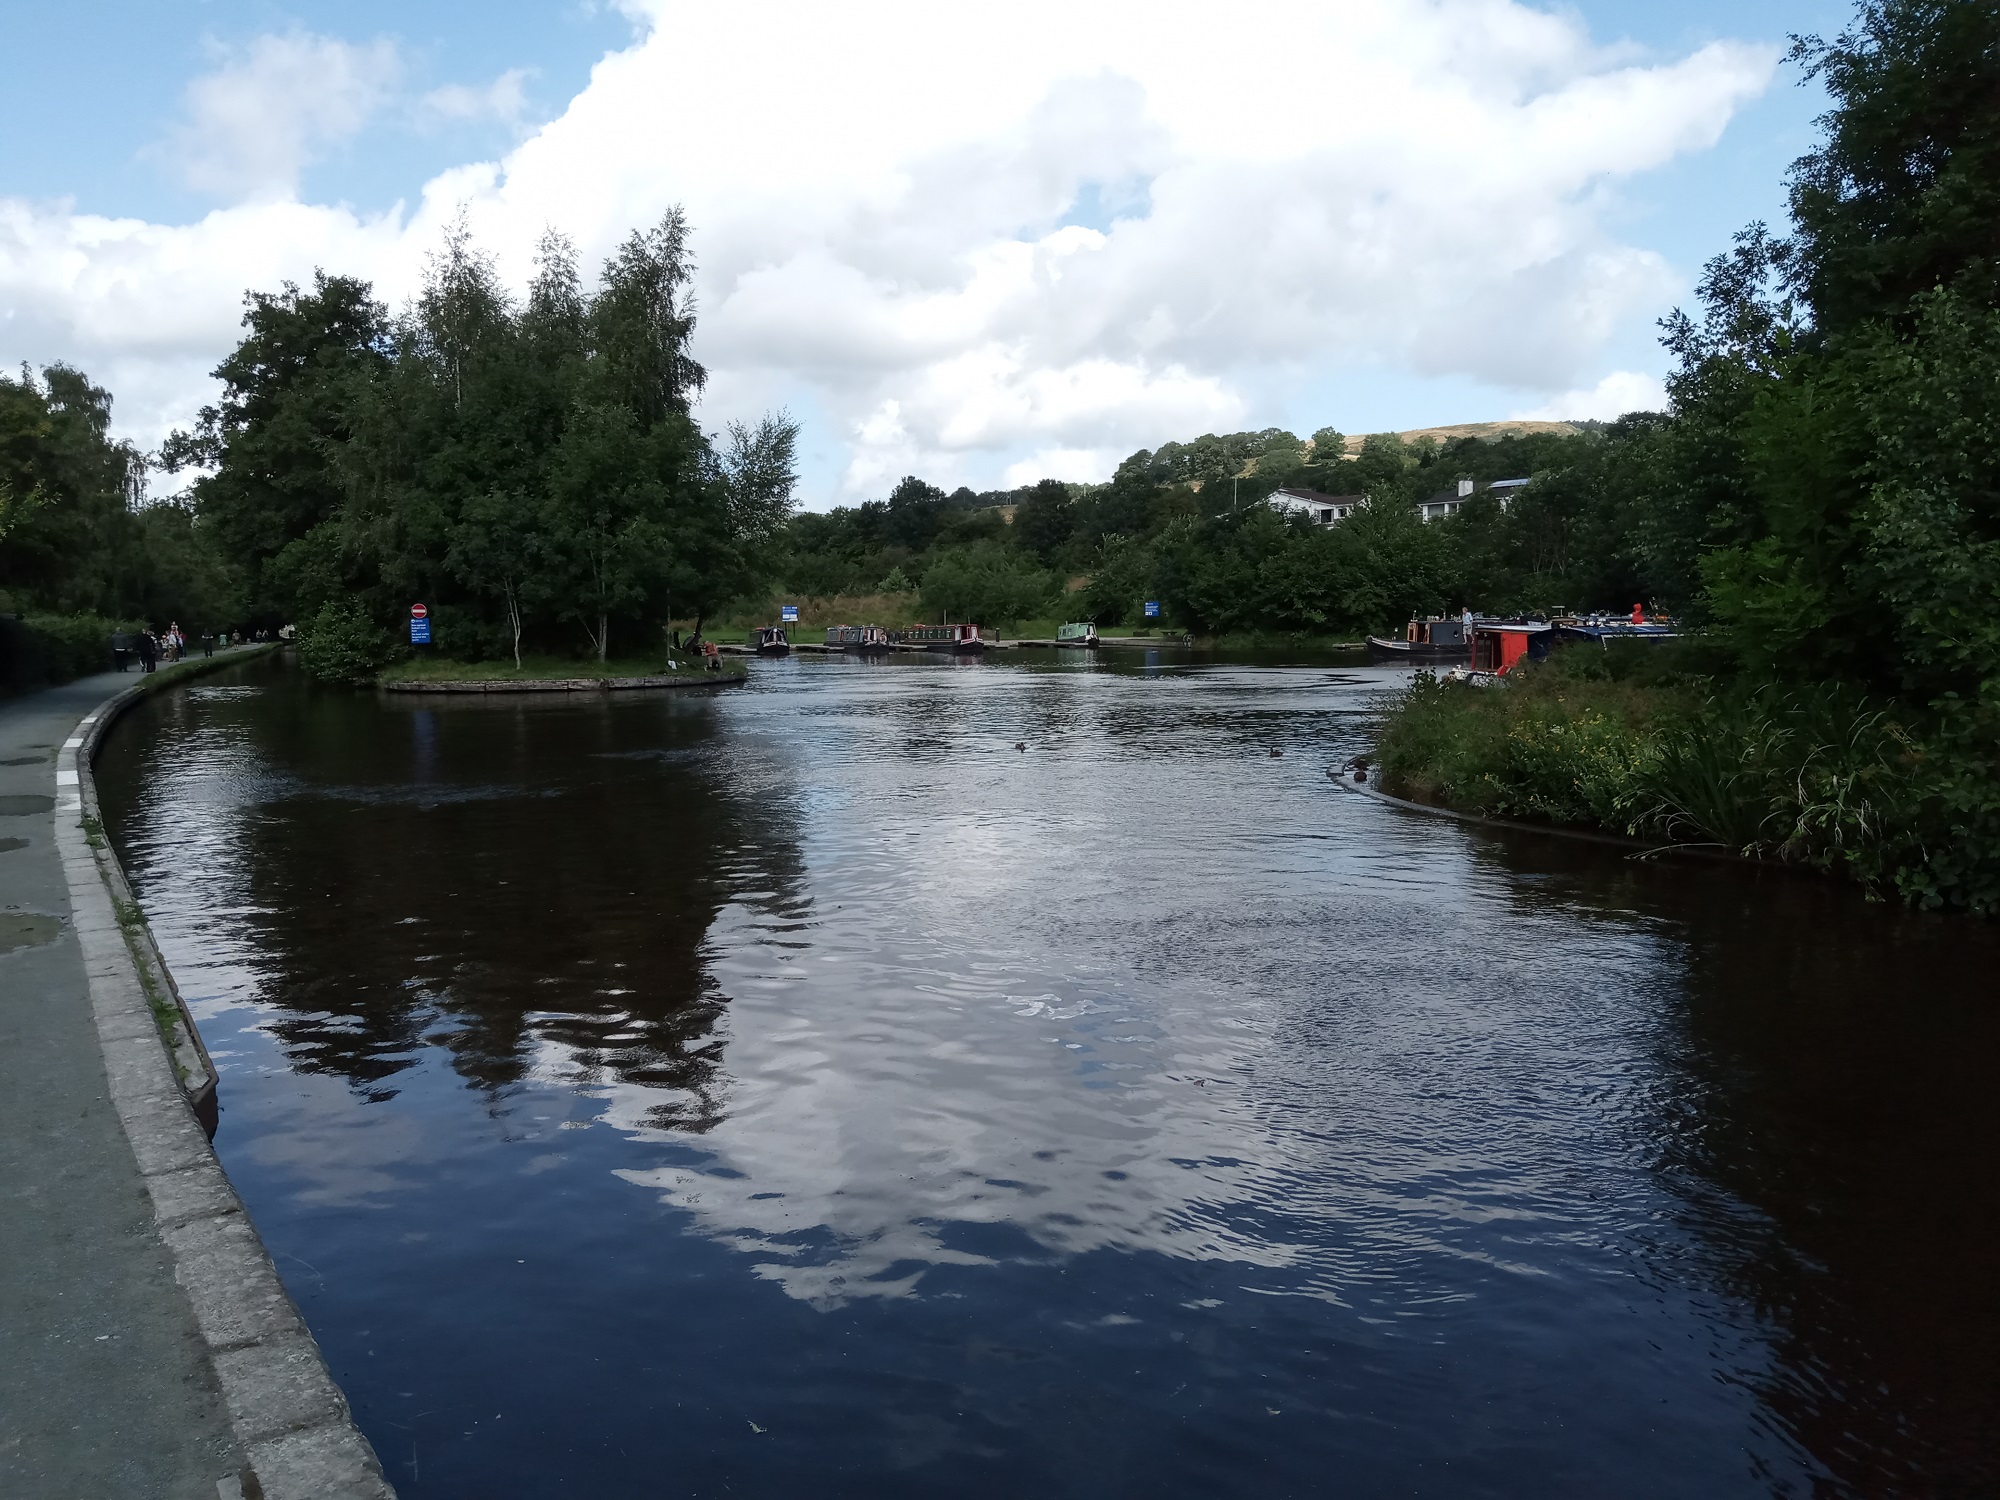 A view of the canal basin in Llangollen, Wales in summer